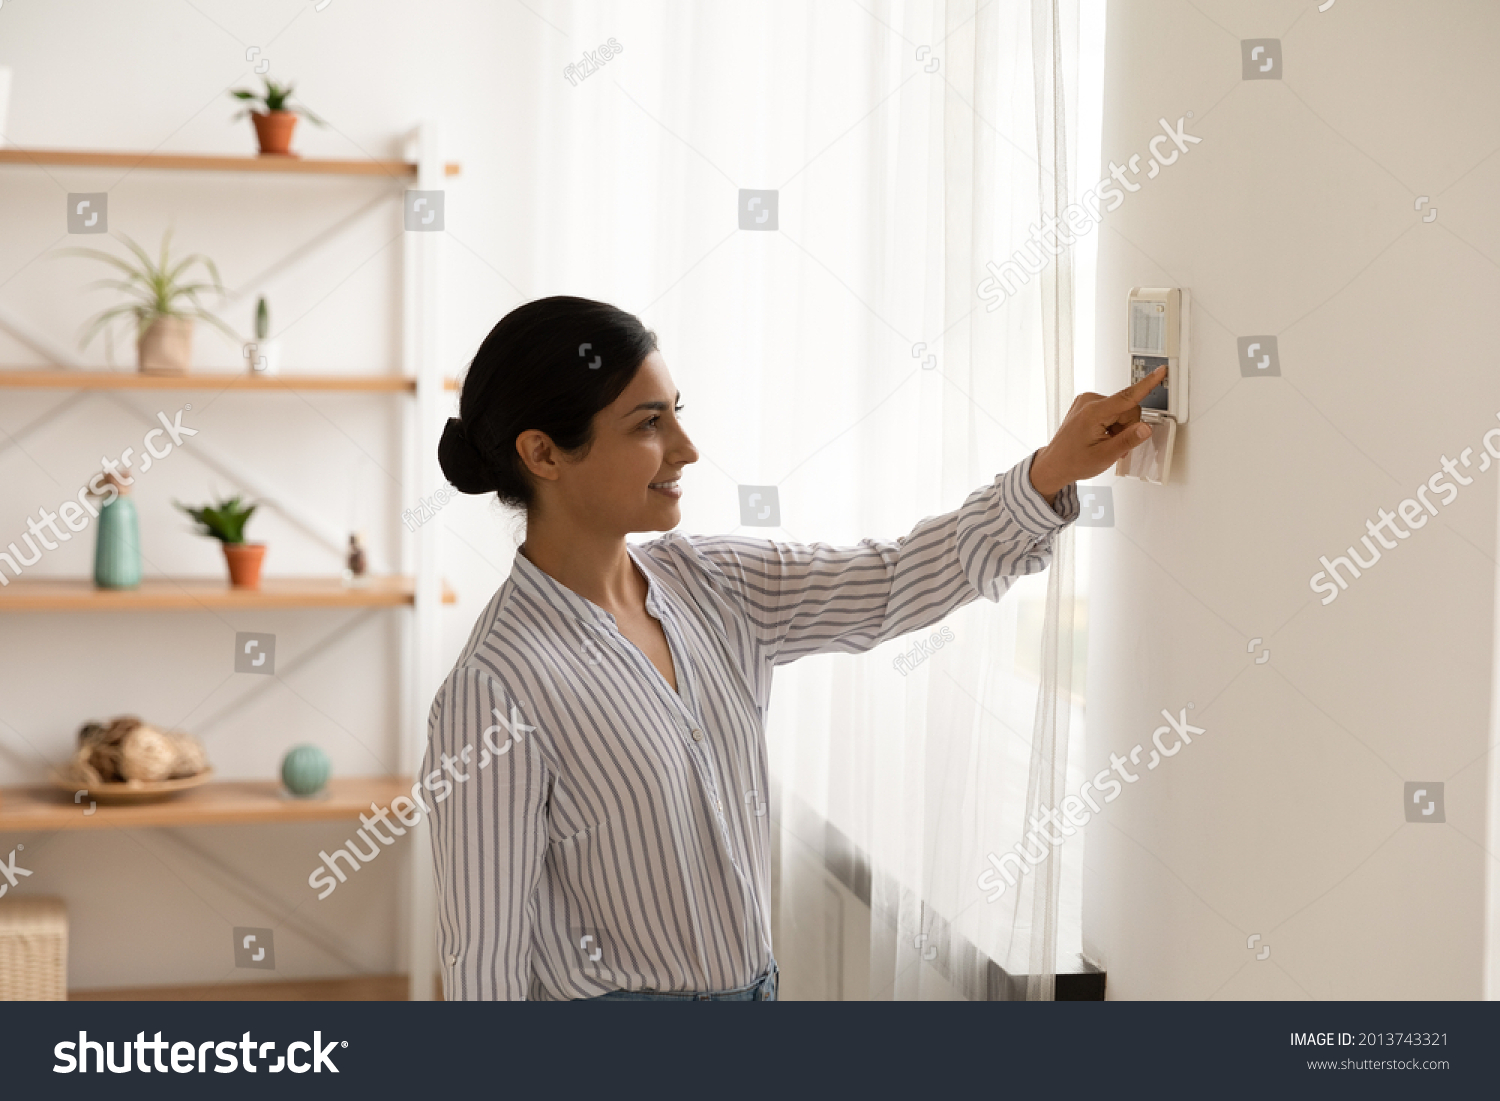 Smiling Indian woman using modern smart home system, controller on wall, positive attractive young female switching temperature on thermostat or activating security alarm in apartment #2013743321